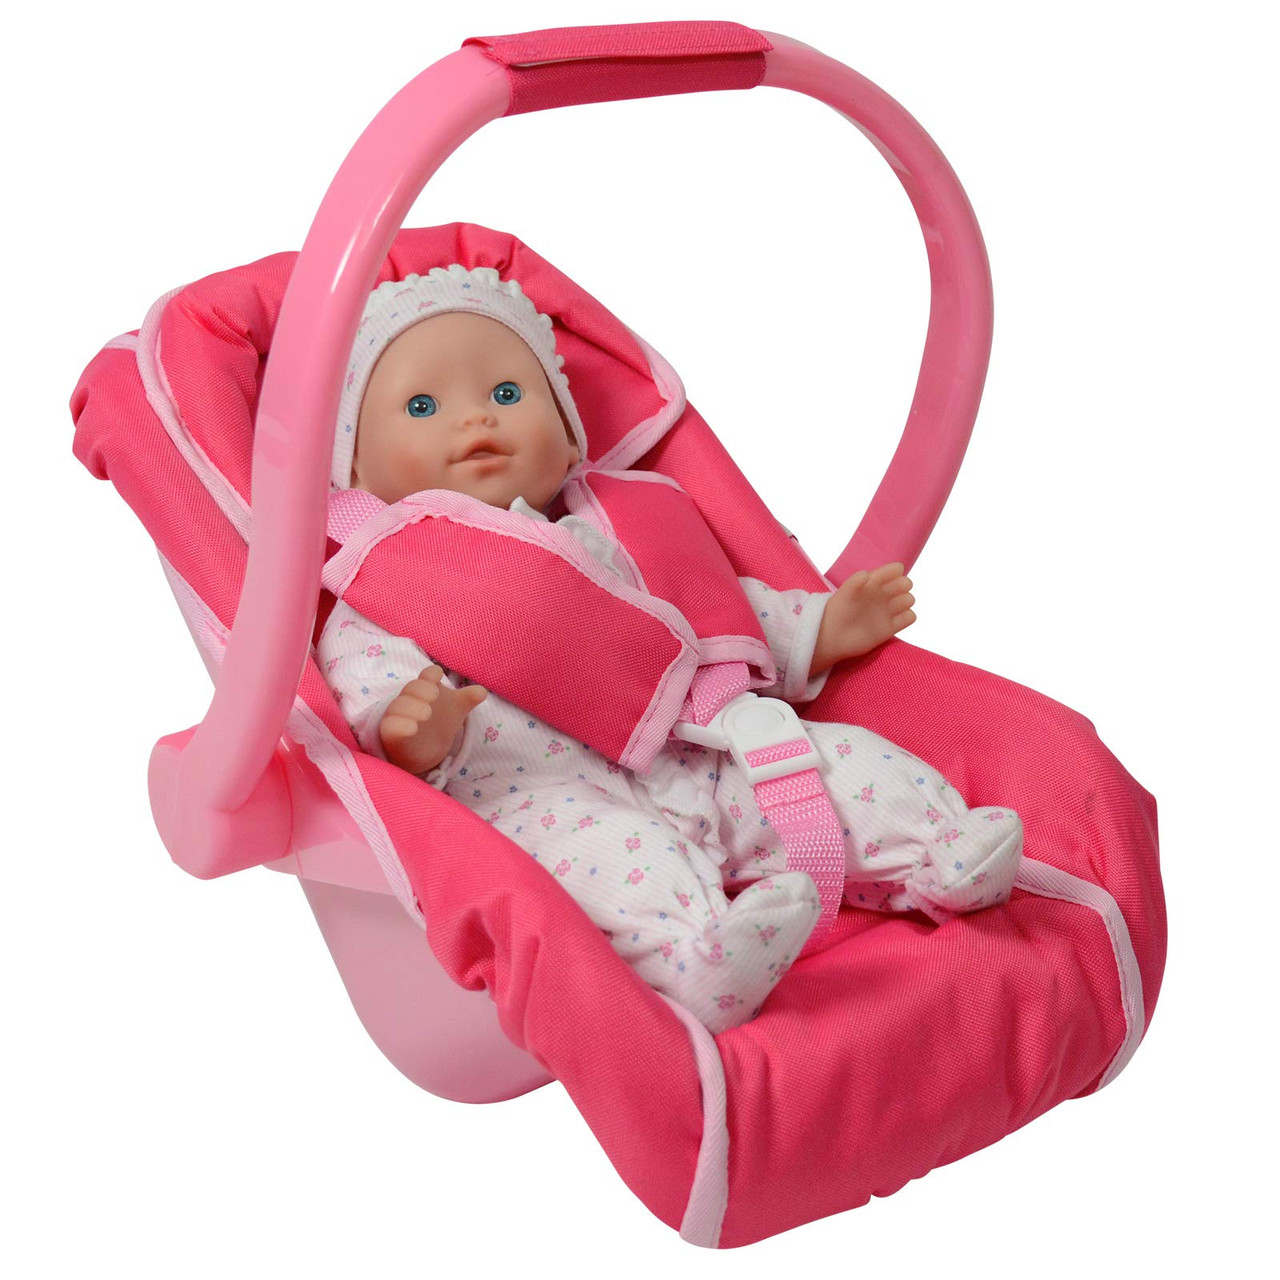 Newborn Baby Doll with Accessories